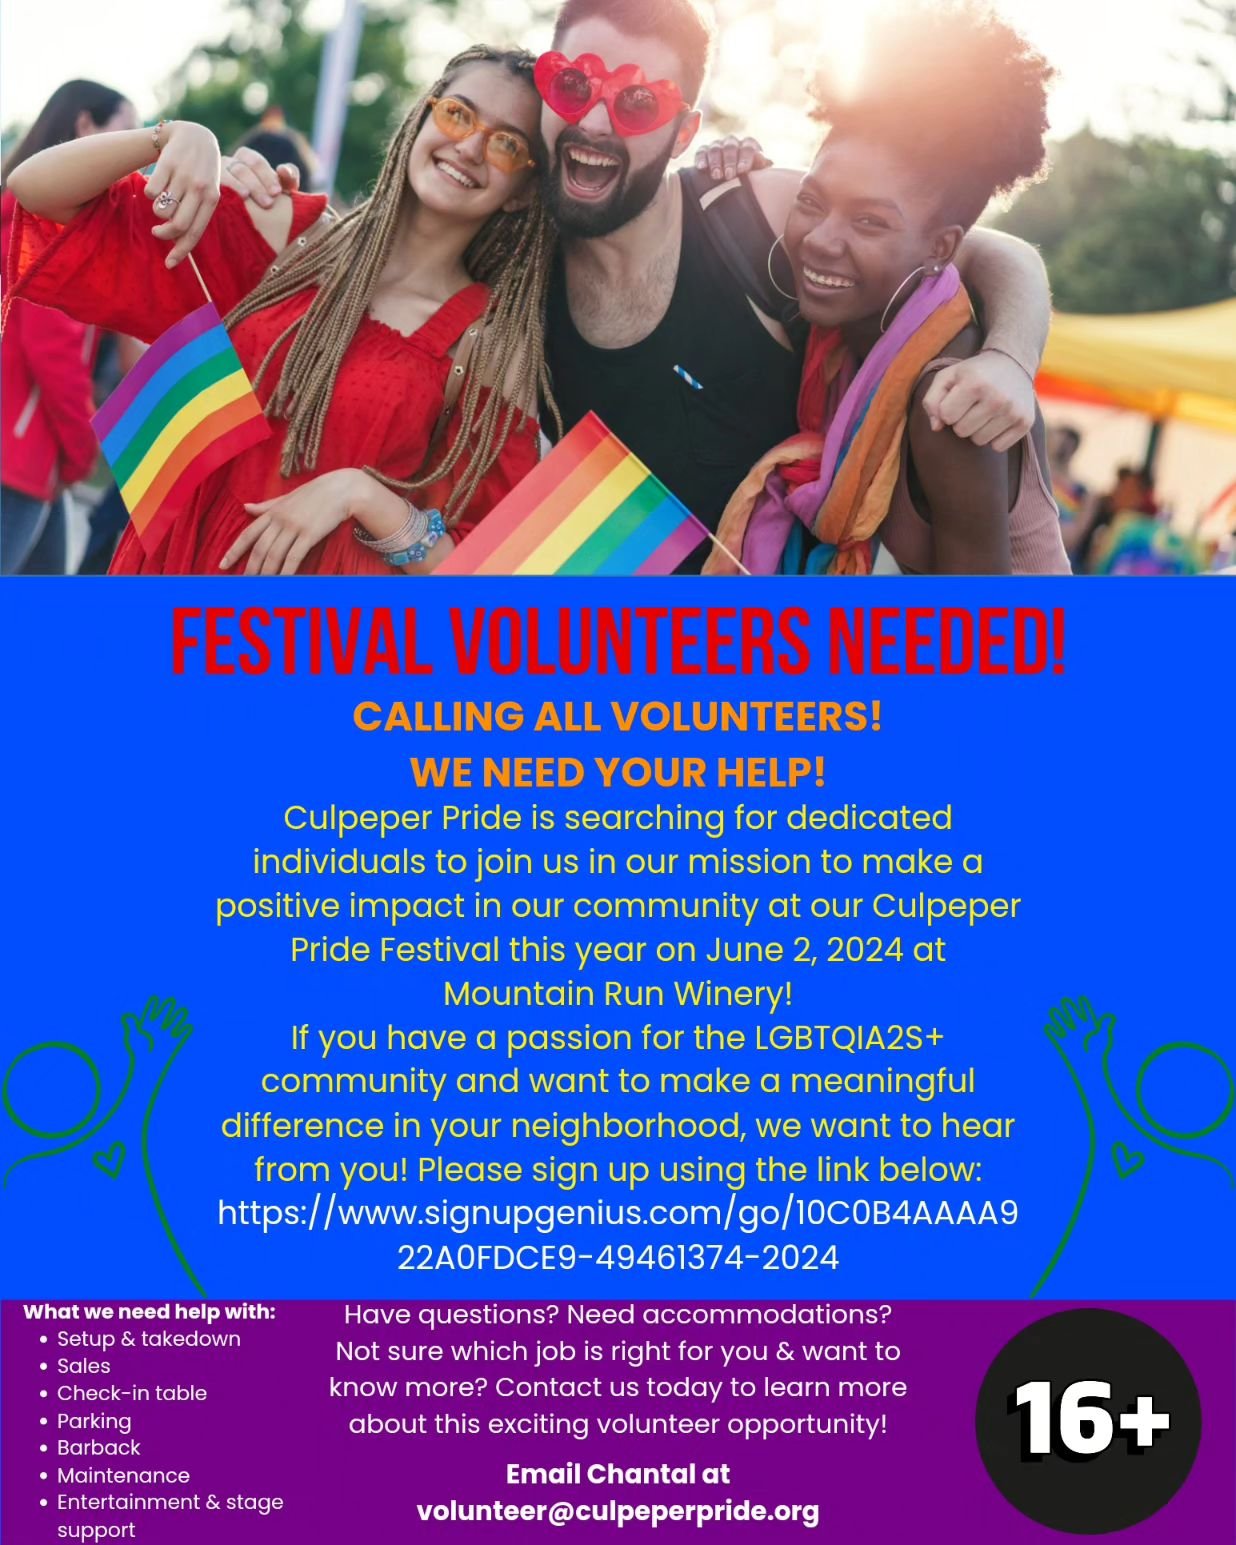 CALLING ALL VOLUNTEERS! WE NEED YOUR HELP!

Culpeper Pride is looking for FESTIVAL VOLUNTEERS for our Culpeper Pride Festival this year on June 2, 2024 at Mountain Run Winery!

Sign up here using the link below:

https://www.signupgenius.com/go/10C0B